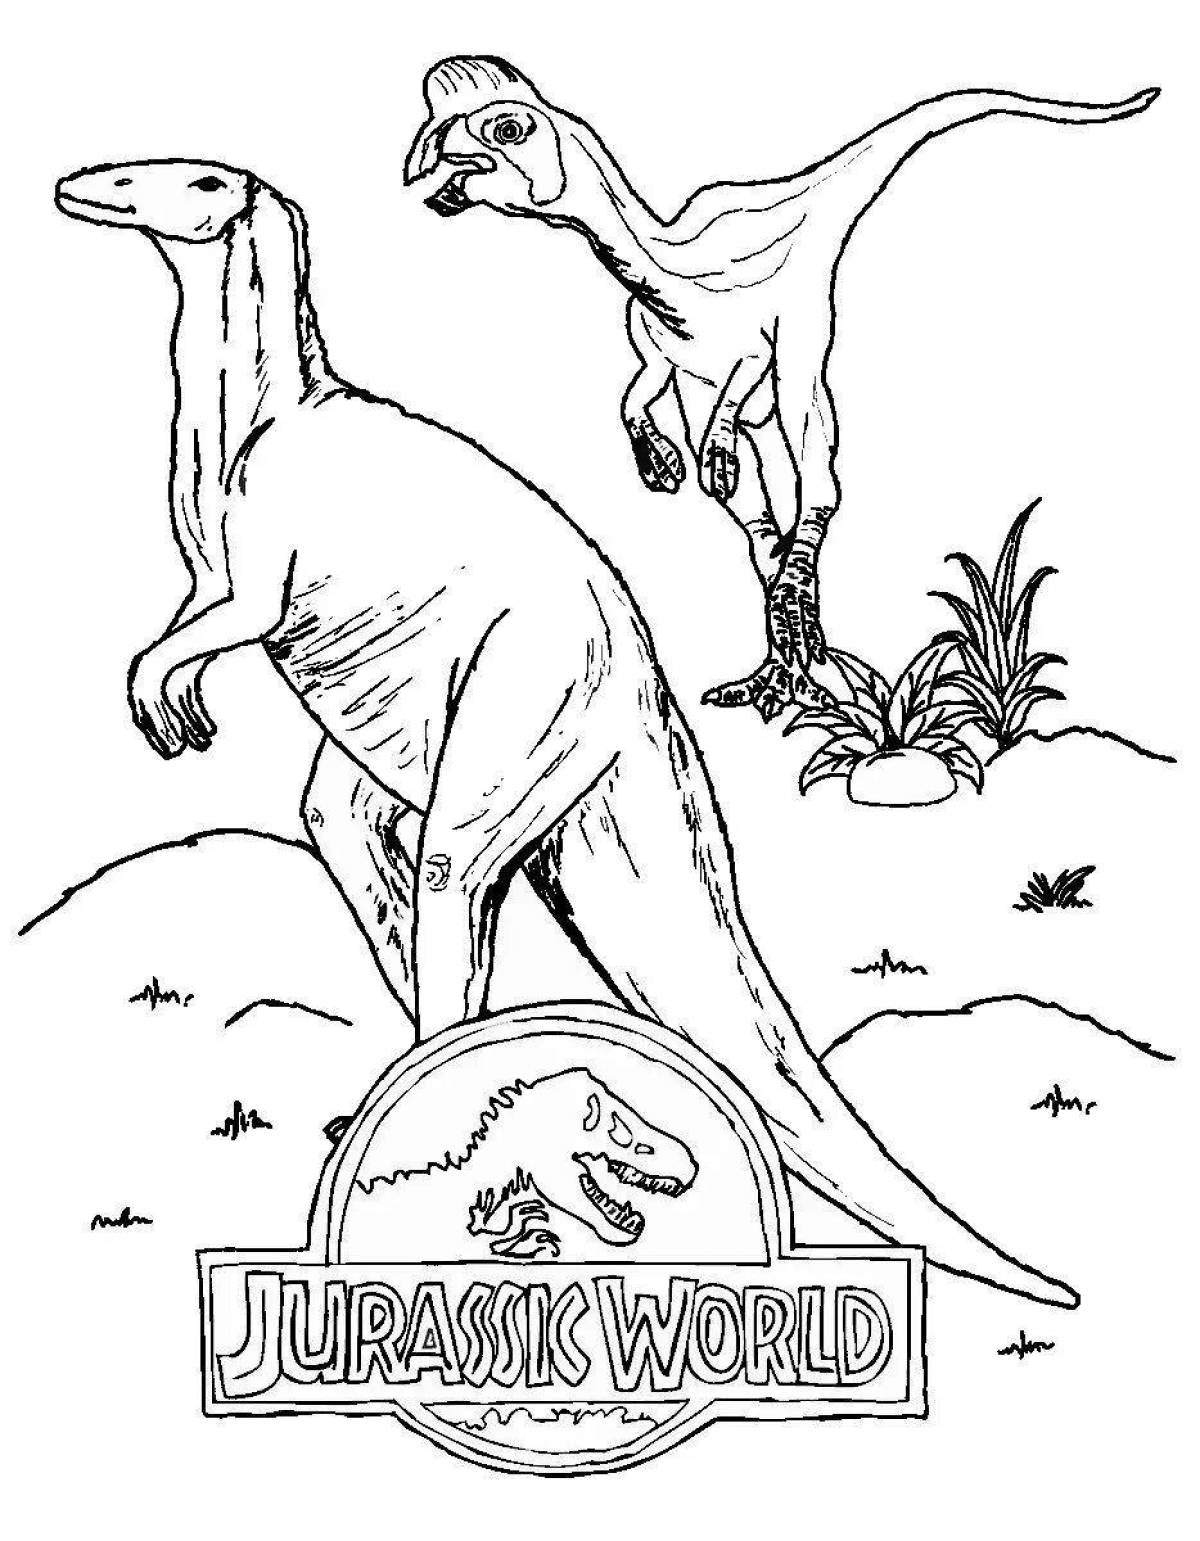 Jurassic park playful coloring page for kids